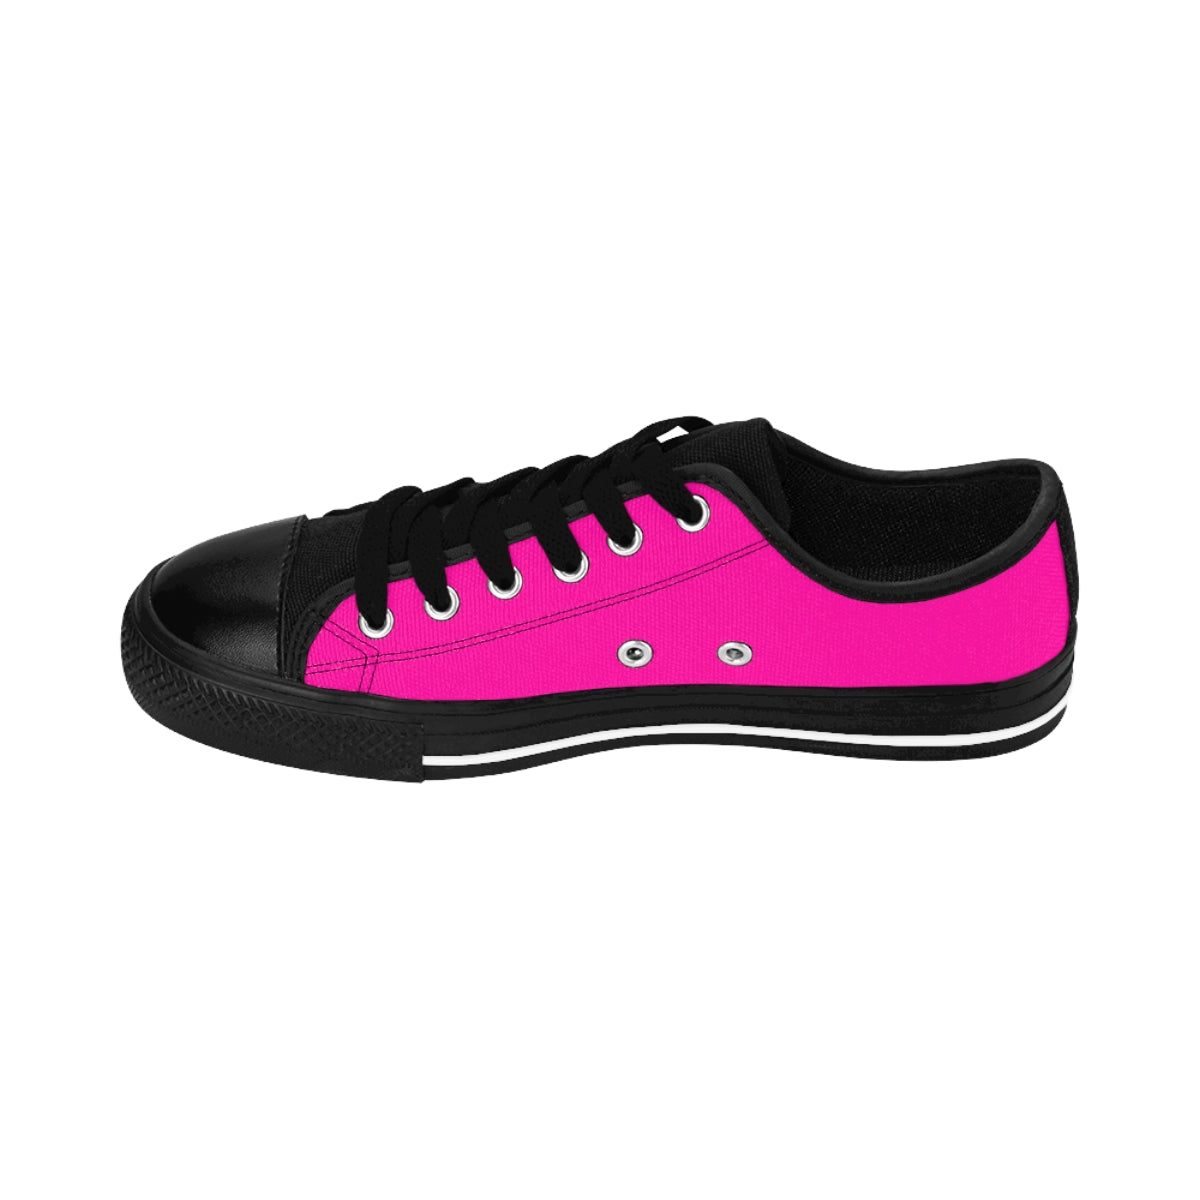 Bright Pink Women's Sneakers